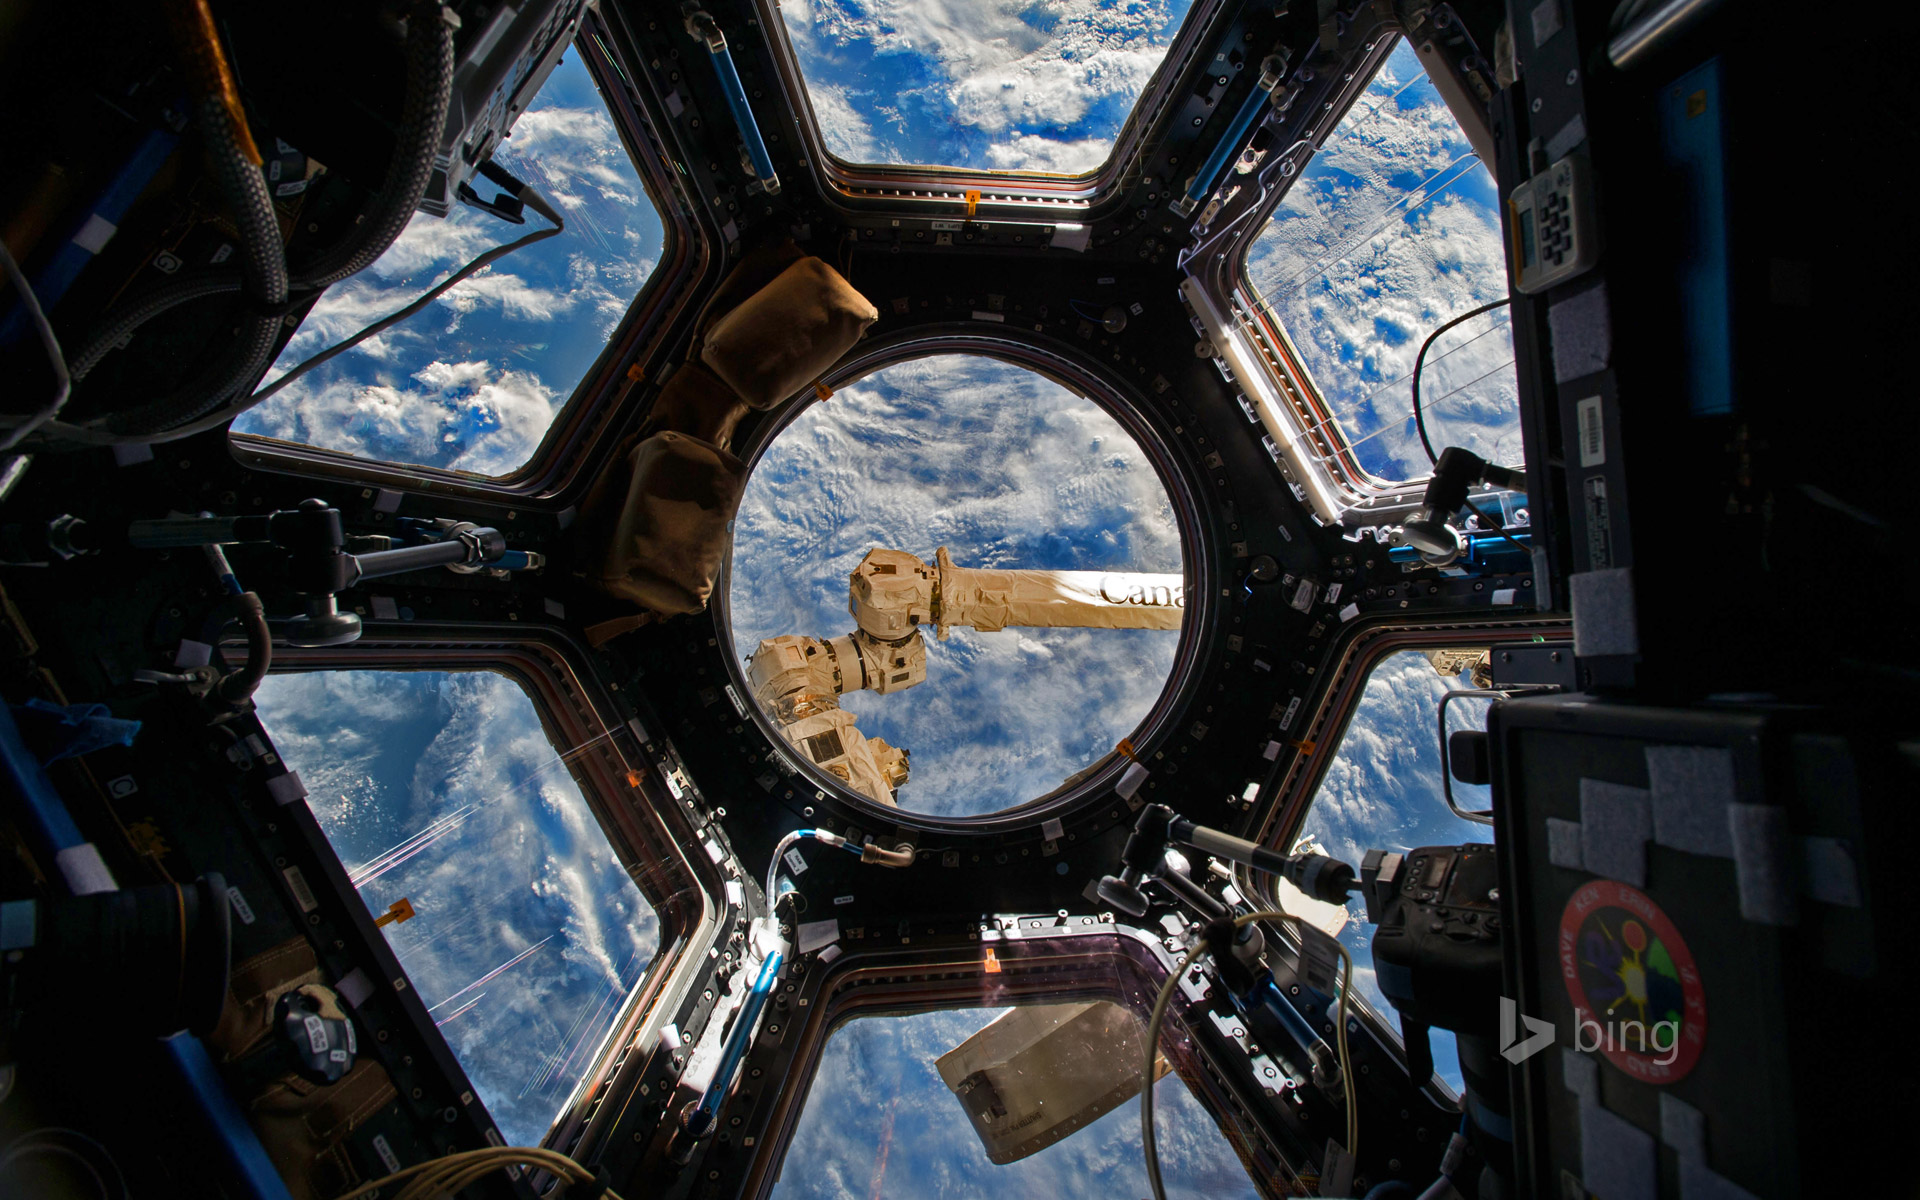 View from the Cupola of the International Space Station